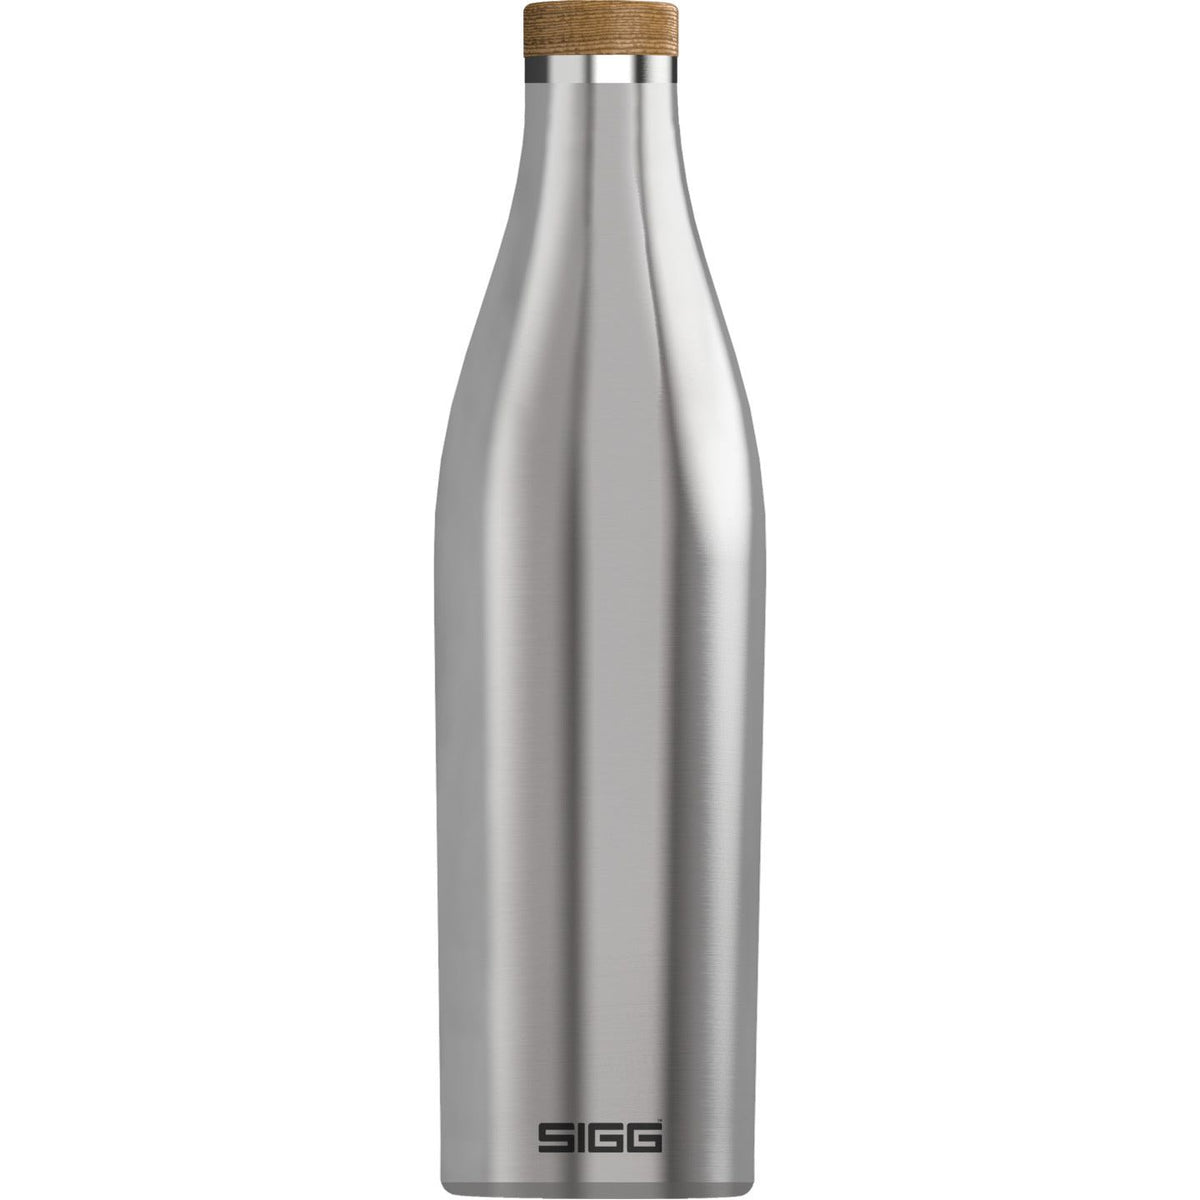 Sigg Meridian 0.7L Insulated Water Bottle - Brushed